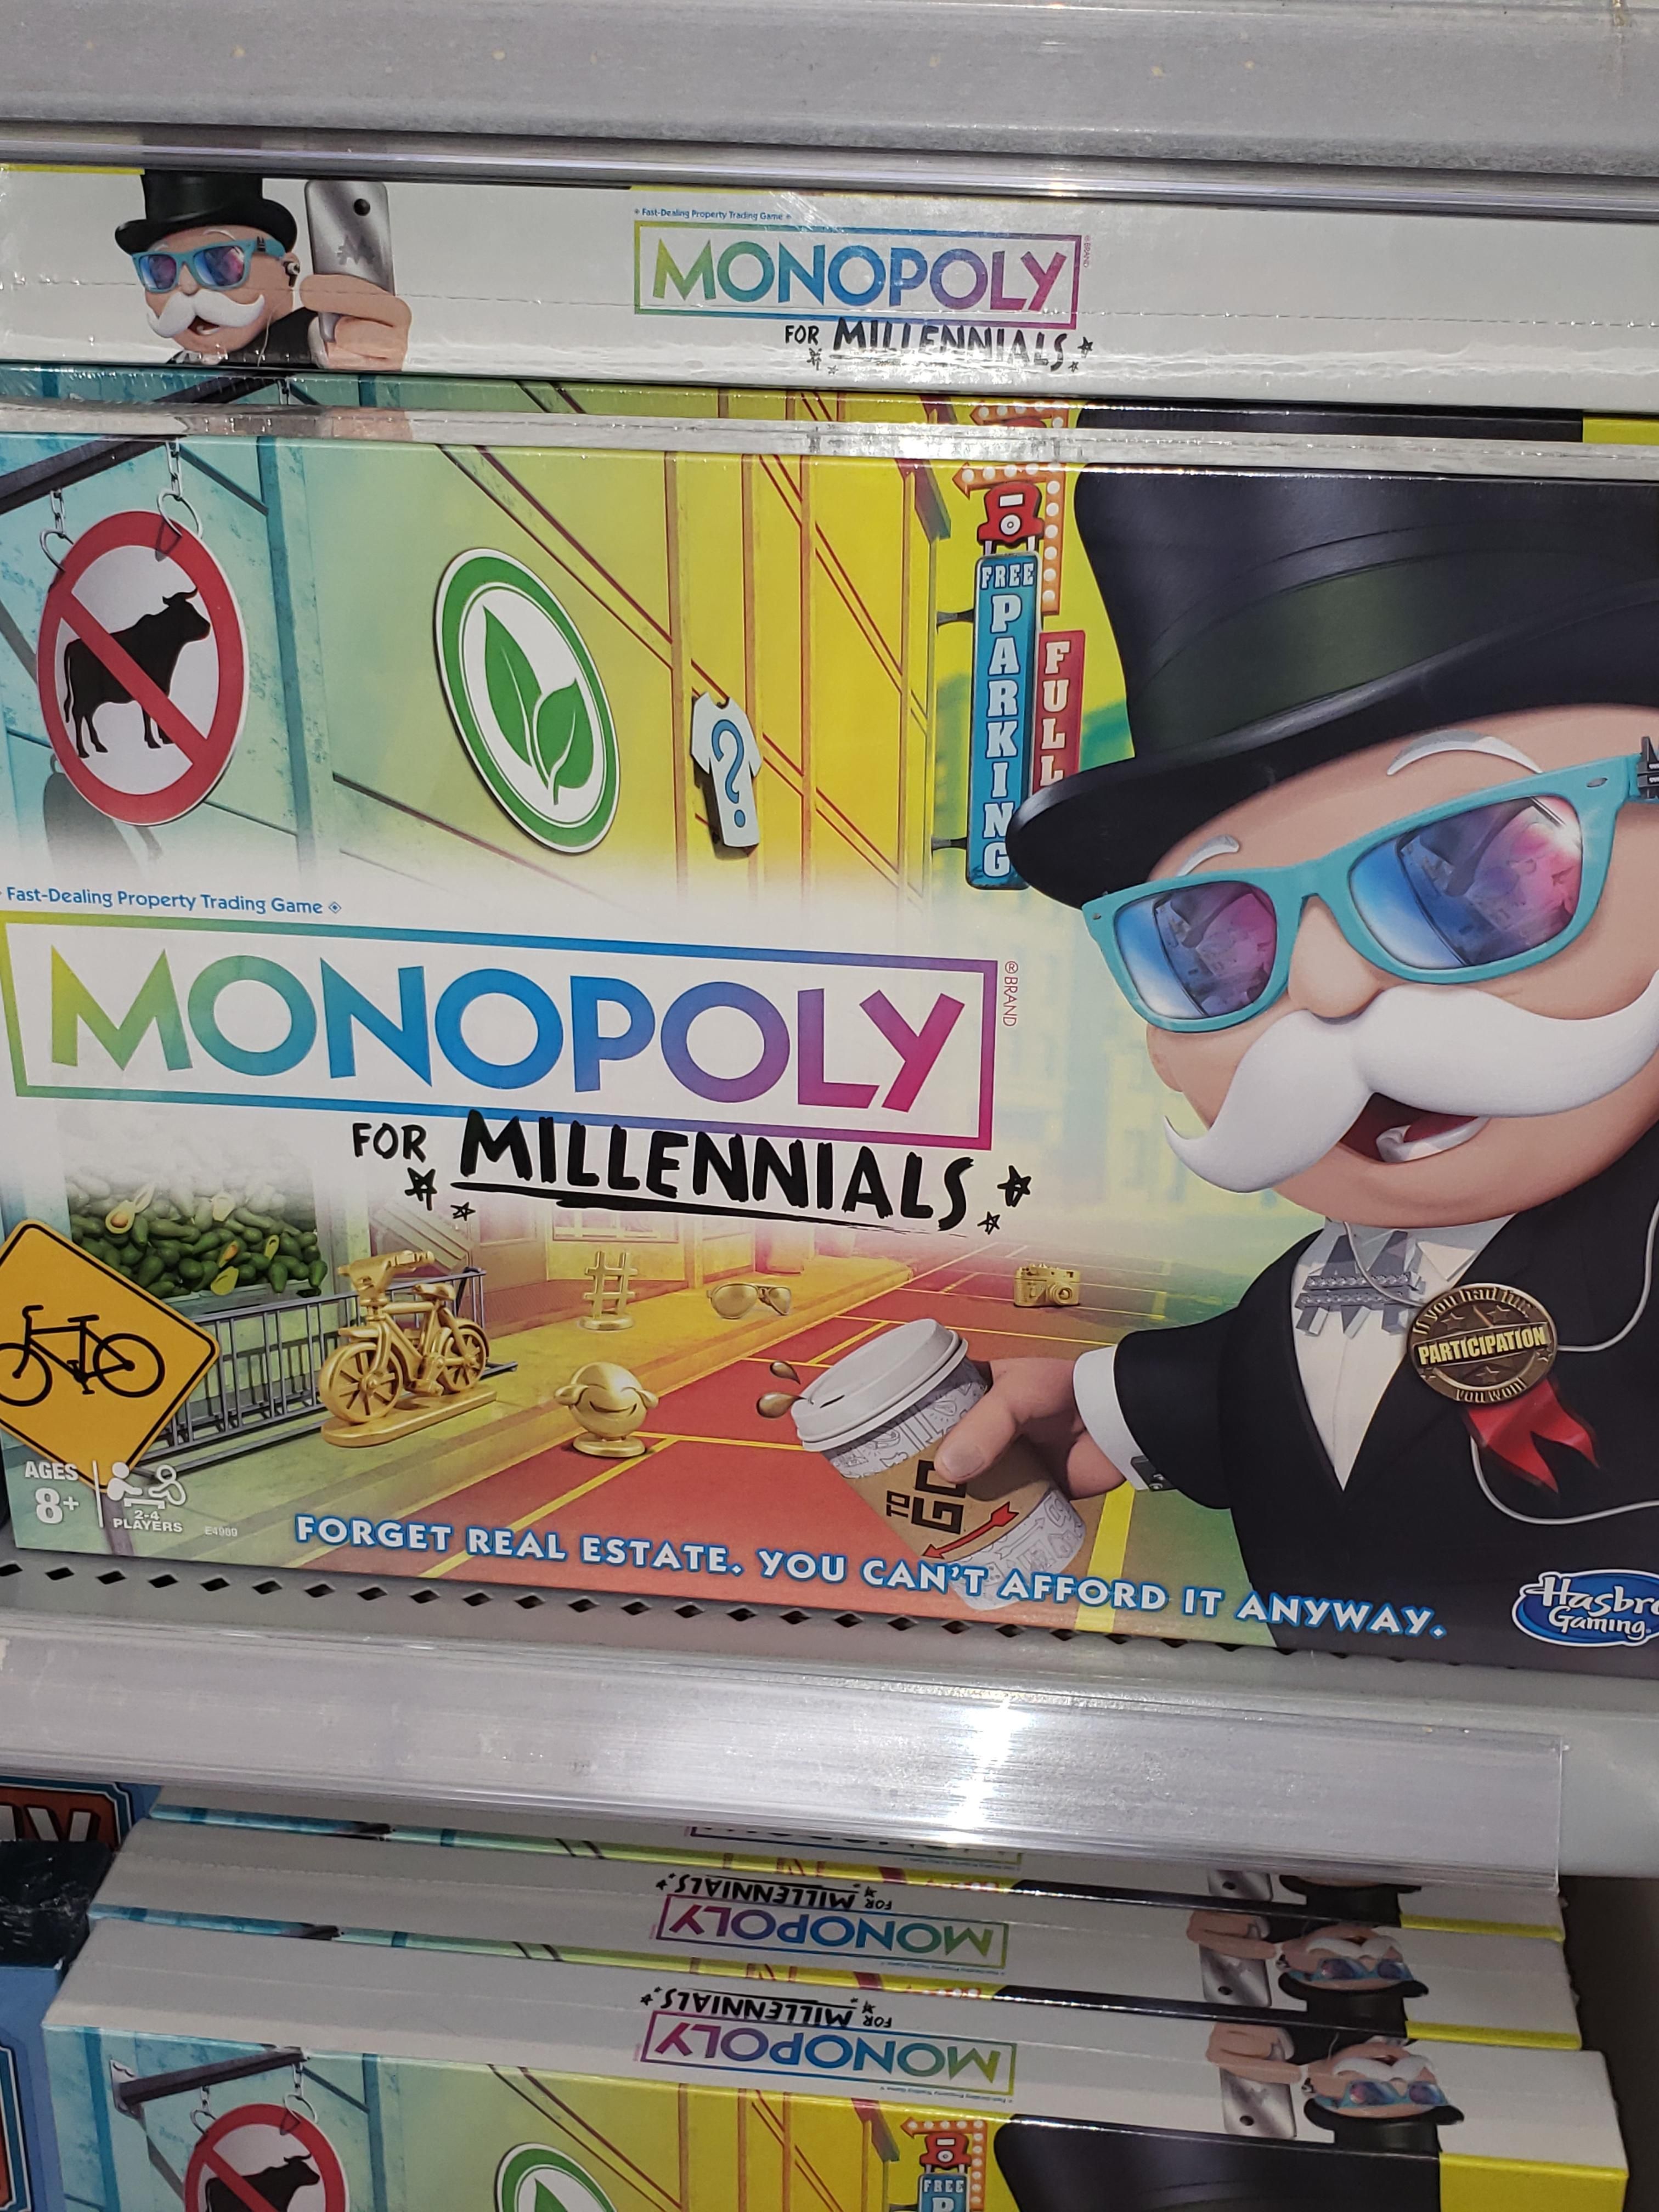 Even Monopoly knows the truth